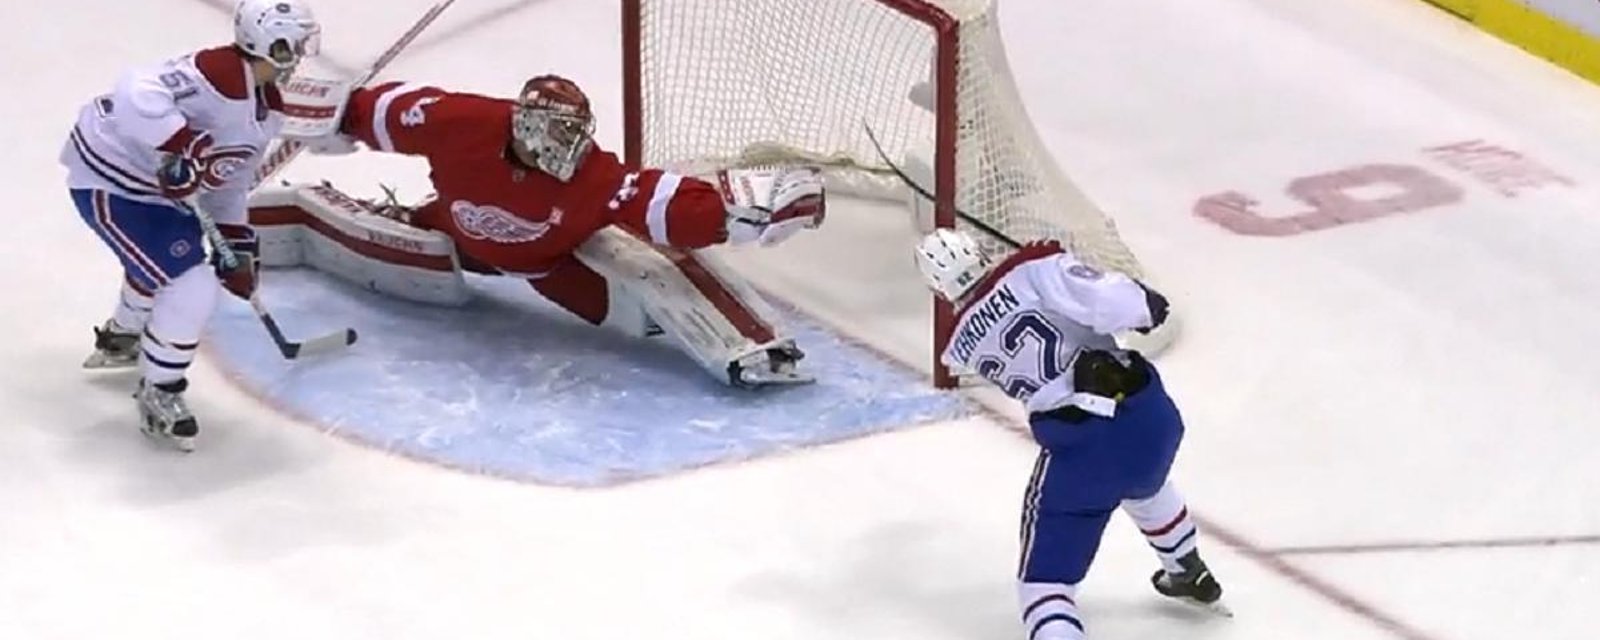 Petr Mrazek with potential save of the year.